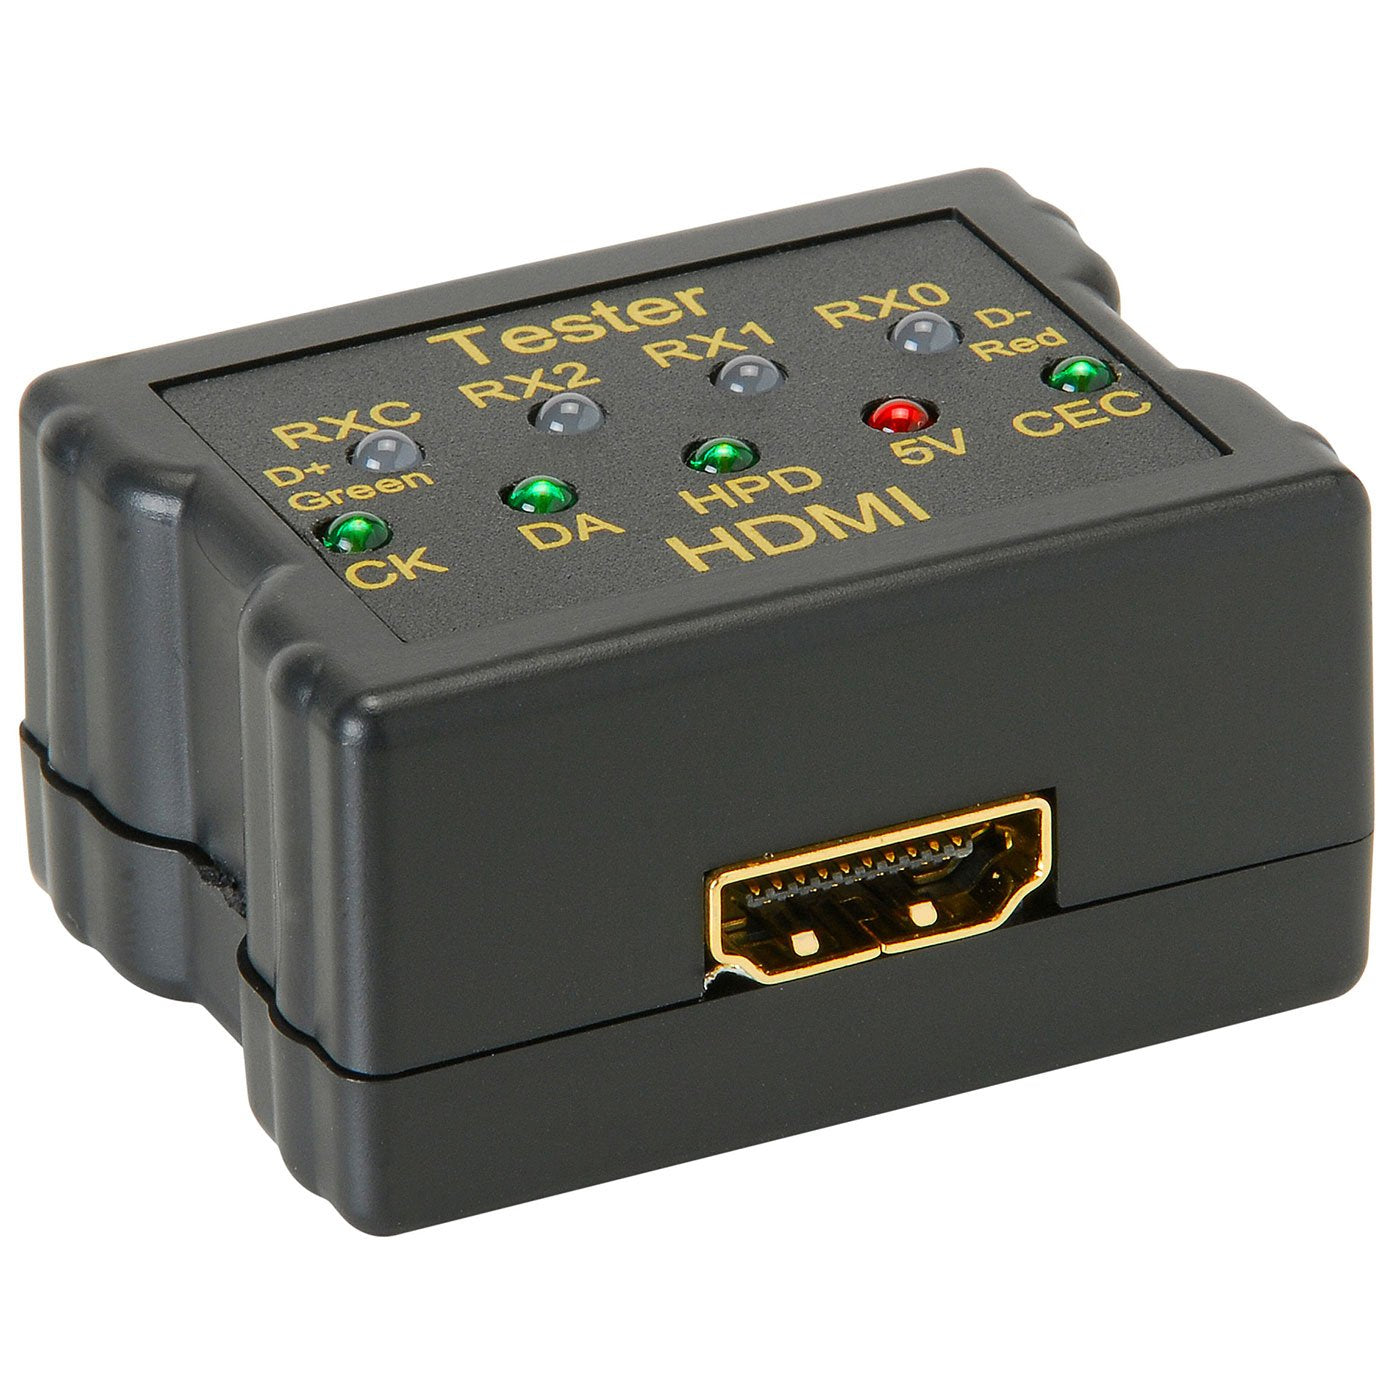 HDMI Cable Signal Tester